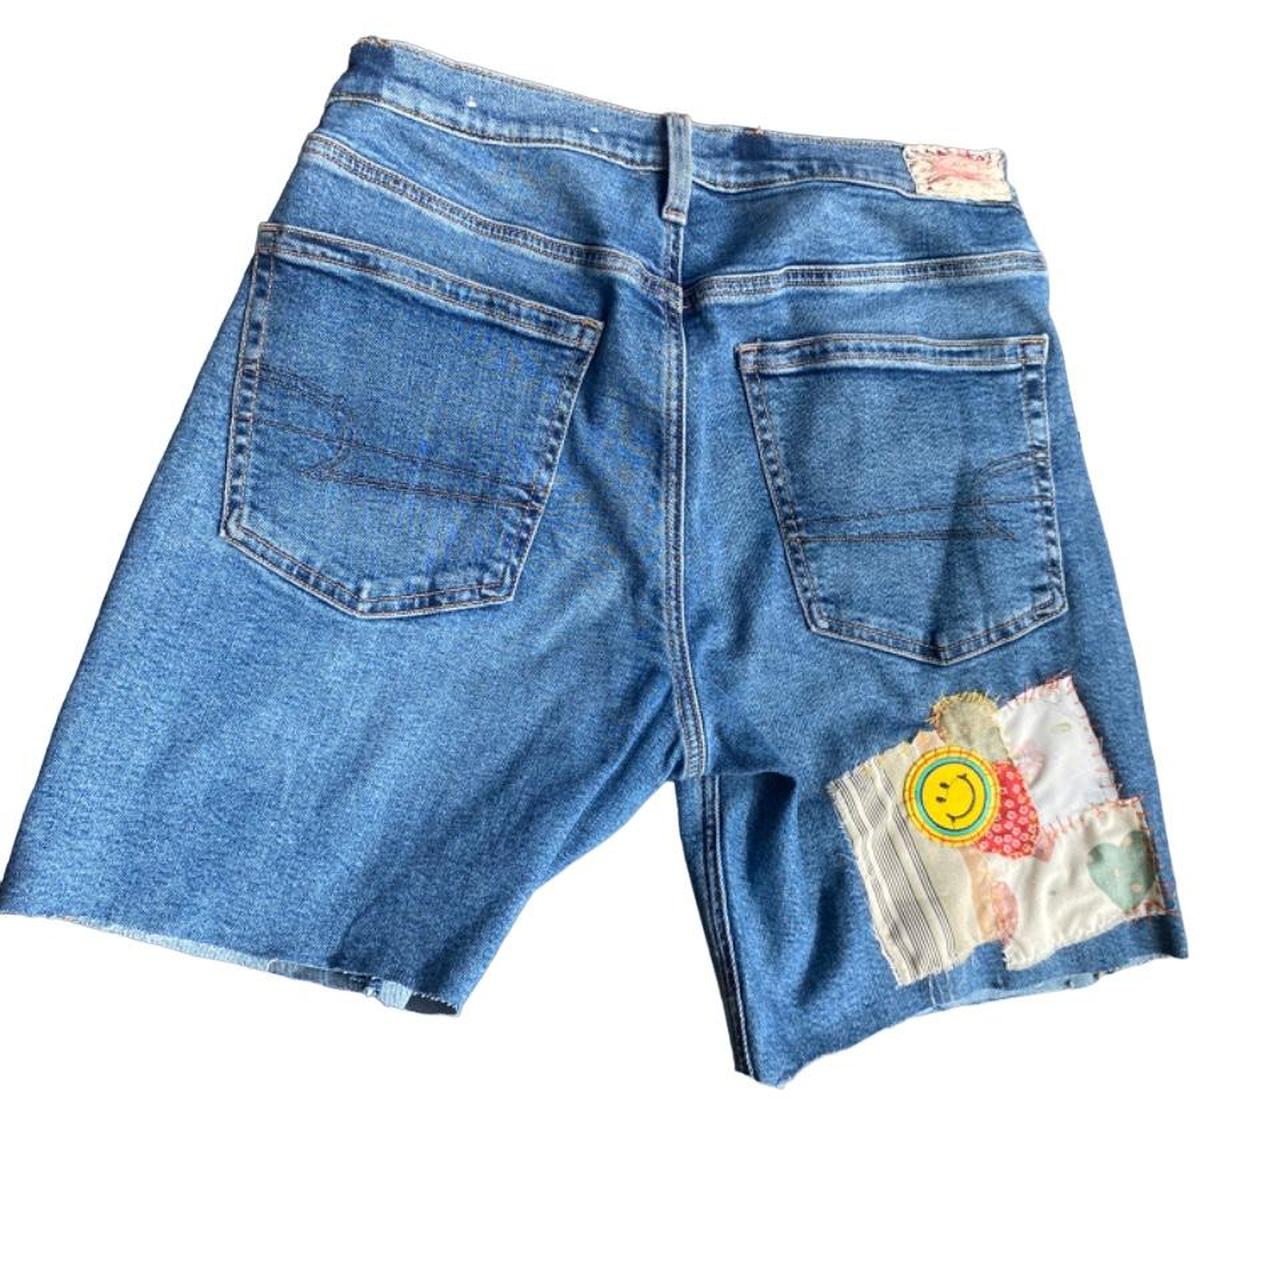 Hand stitched upcycled patch work jorts - shorts -... - Depop